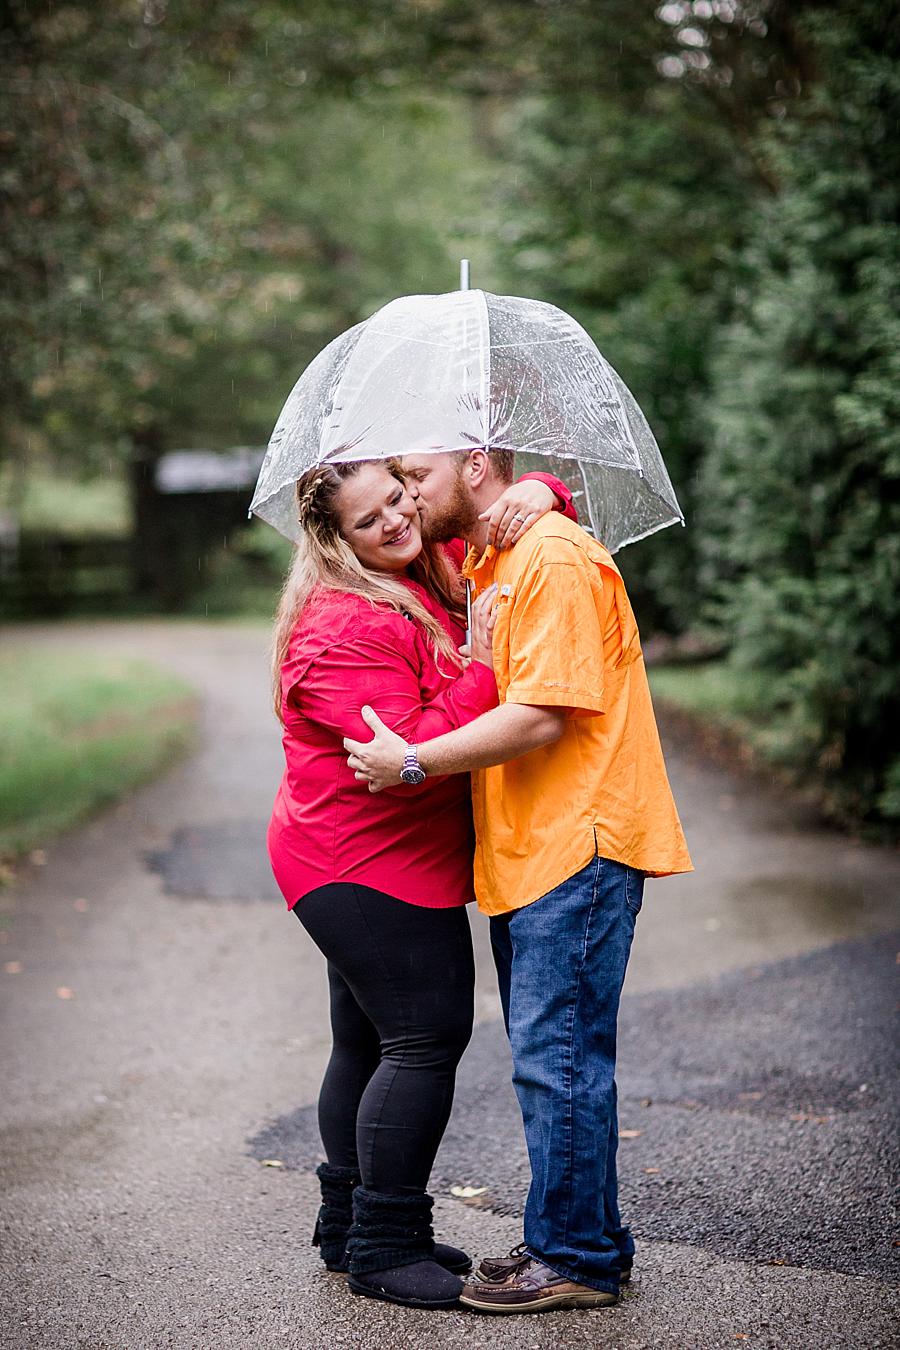 Clear umbrella at this The Stables at Strawberry Creek Engagement Session by Knoxville Wedding Photographer, Amanda May Photos.